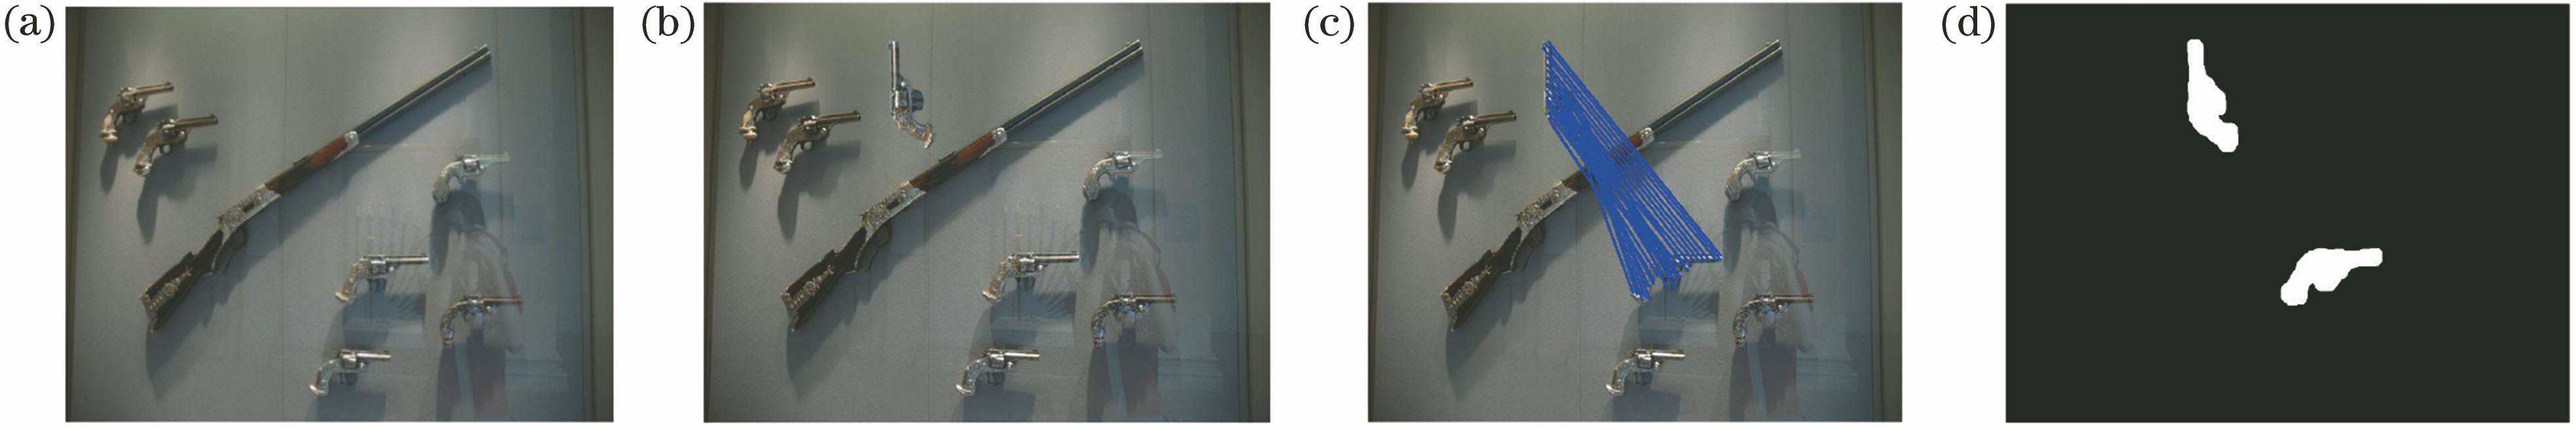 Detection results of the algorithm on rotation transform operation. (a) Original image; (b) tampering image (rotation 90°); (c) matching result; (d) detection result